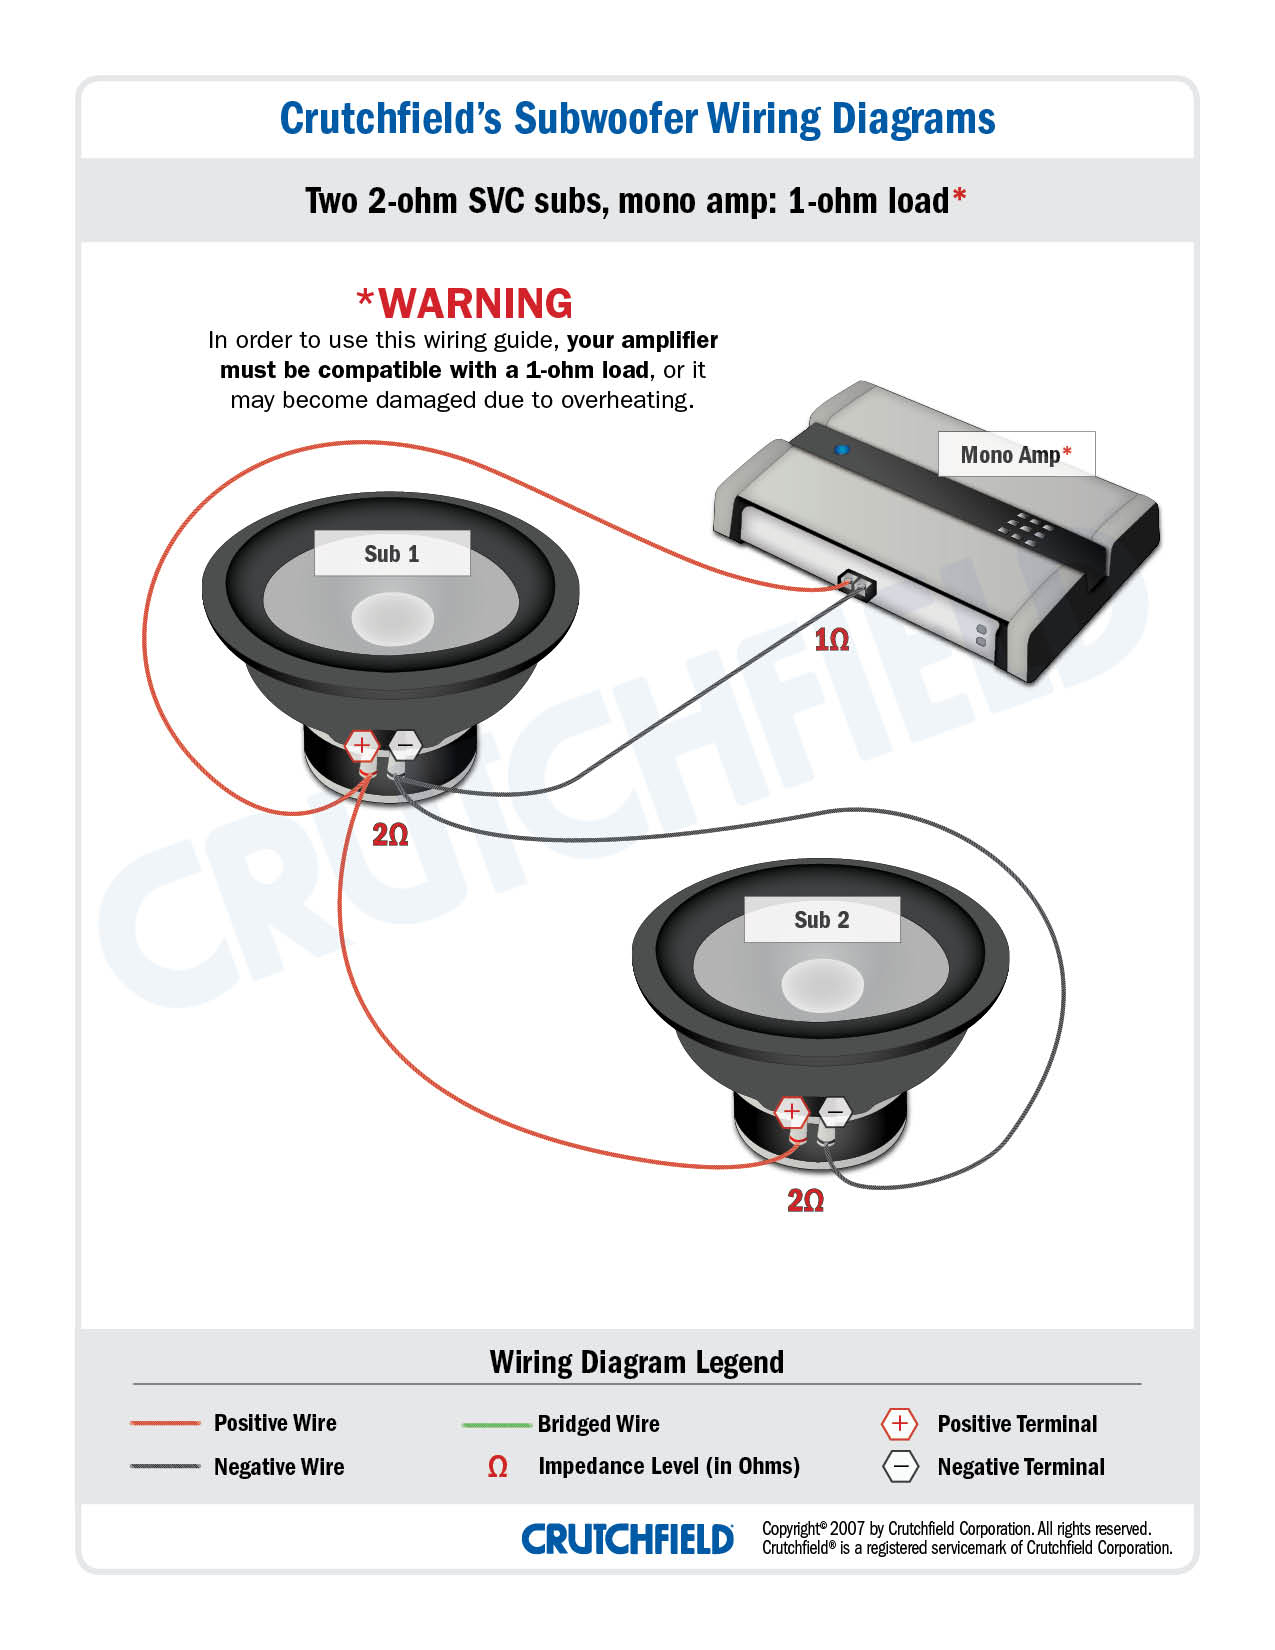 Subwoofer Wiring Diagram Subwoofer Wiring Diagrams How To Wire Your Subs